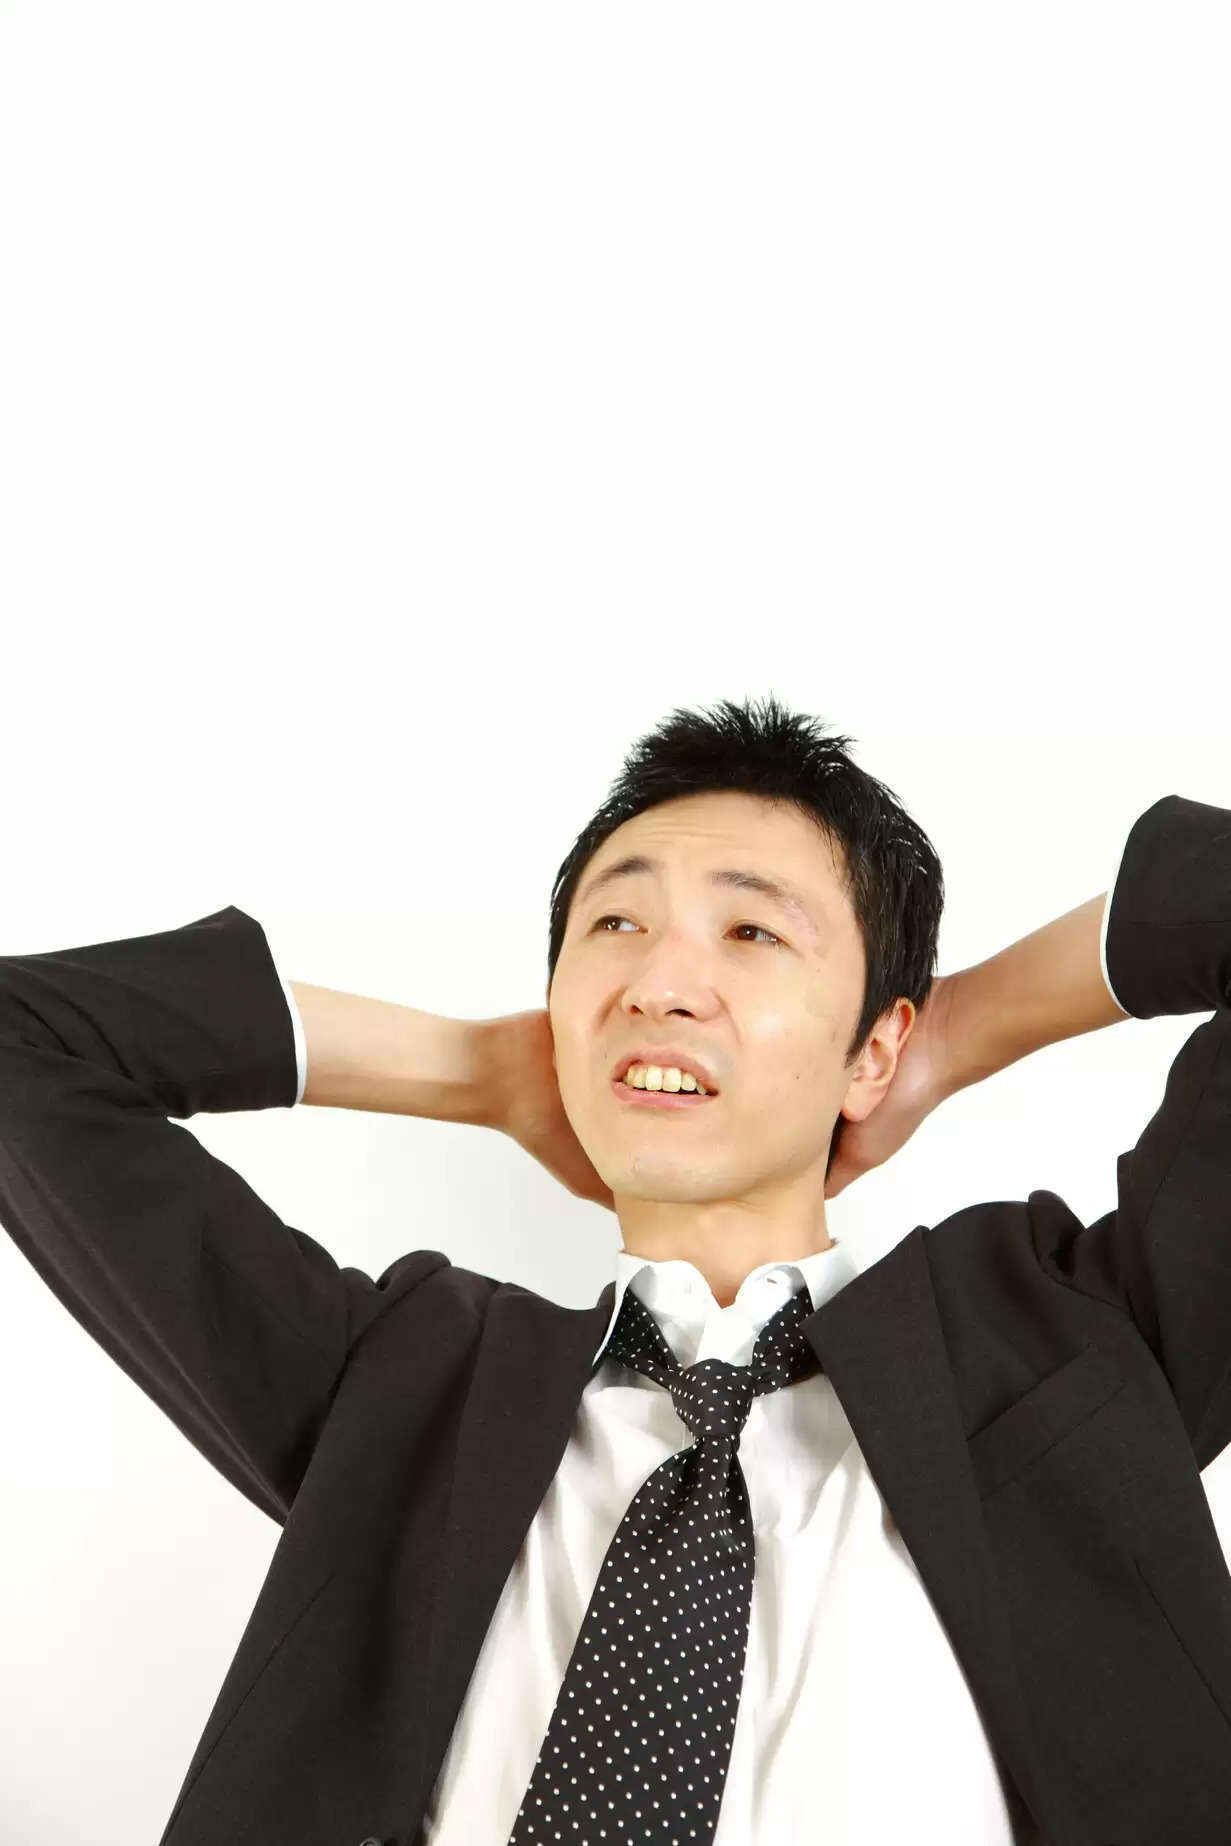 Tips to fight fatigue in the workplace